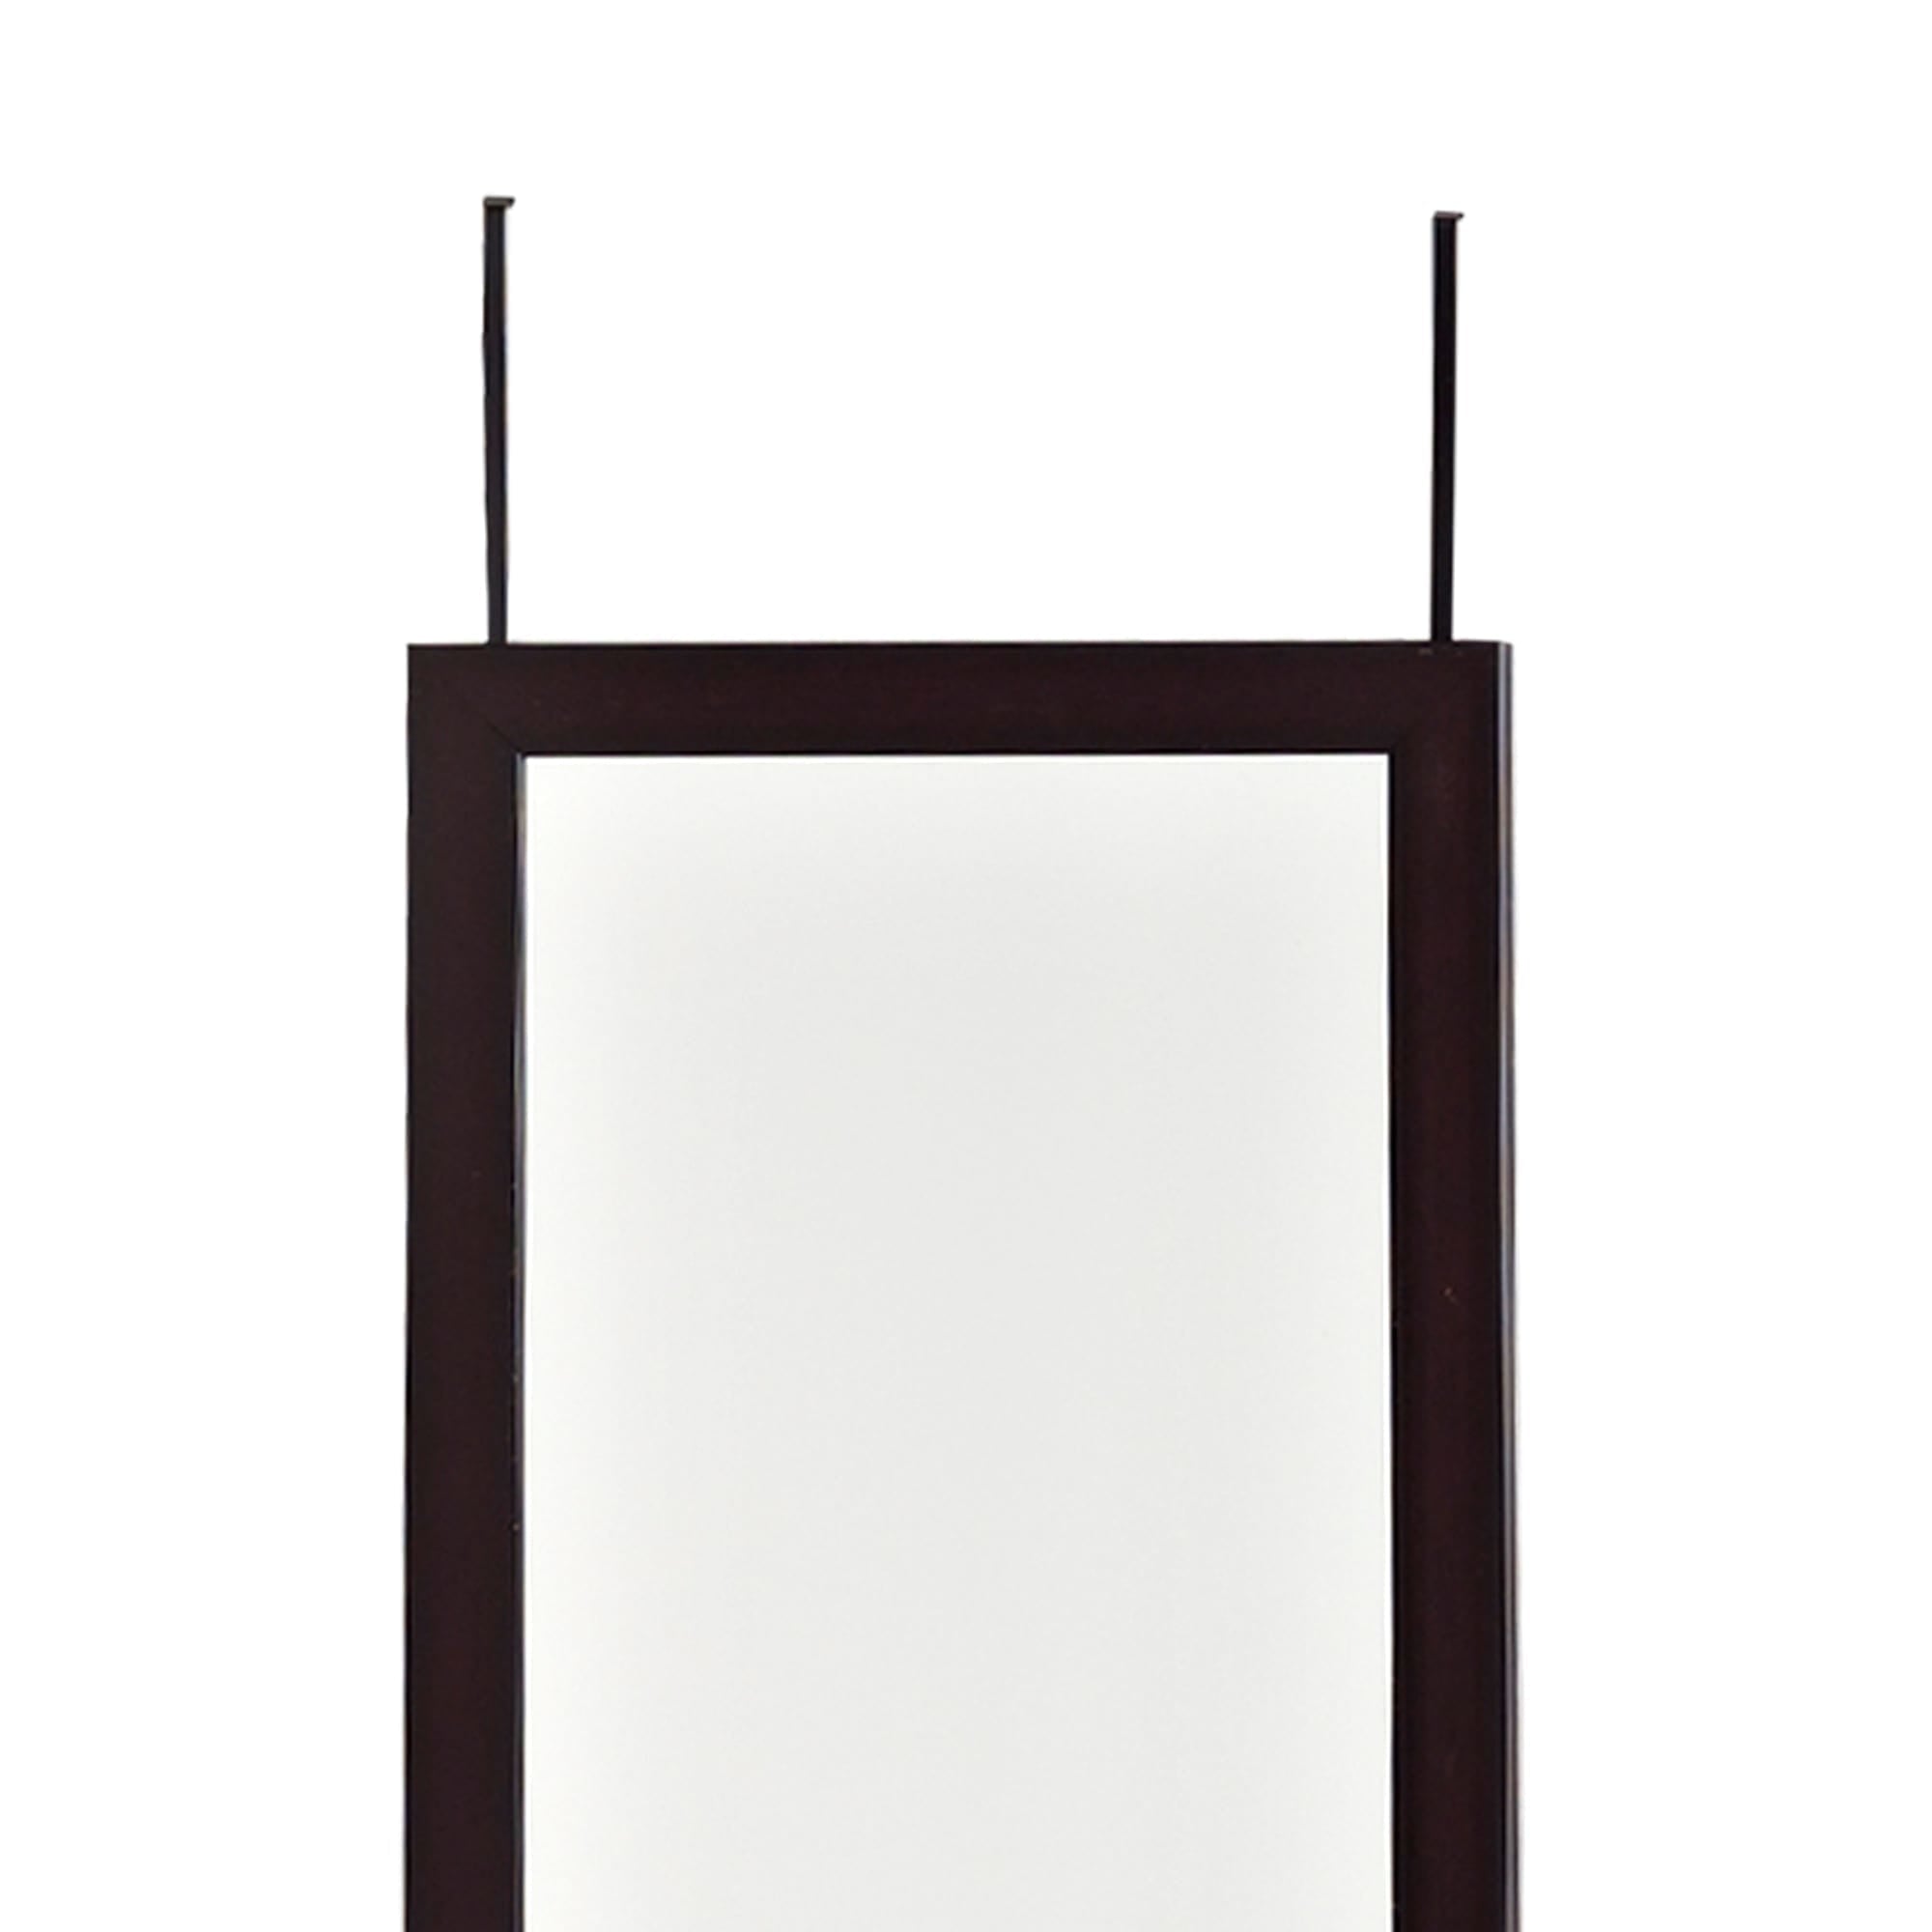 Home Basics Over The Door Mirror, Mahogany $12.00 EACH, CASE PACK OF 6